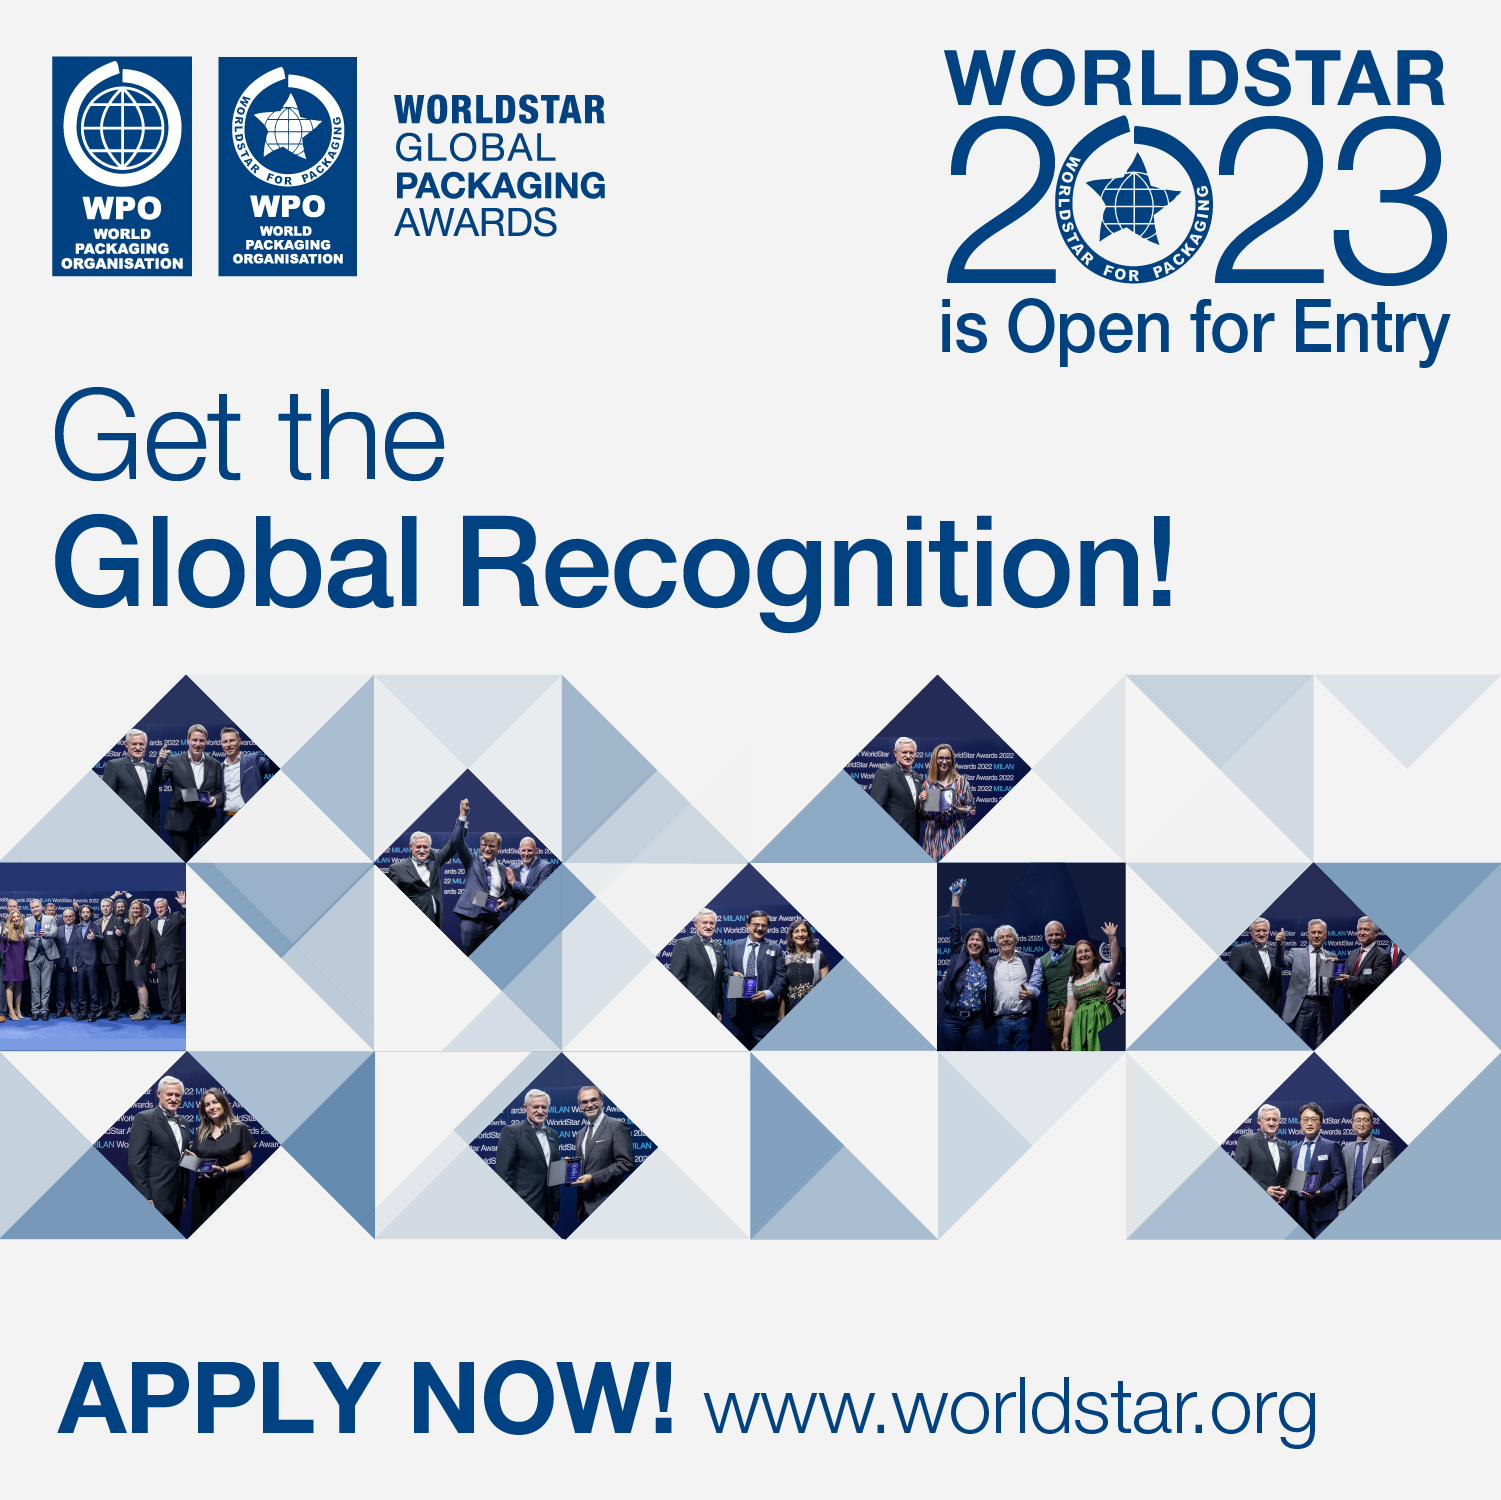 2023 WorldStar Global   Packaging Awards is open for entry